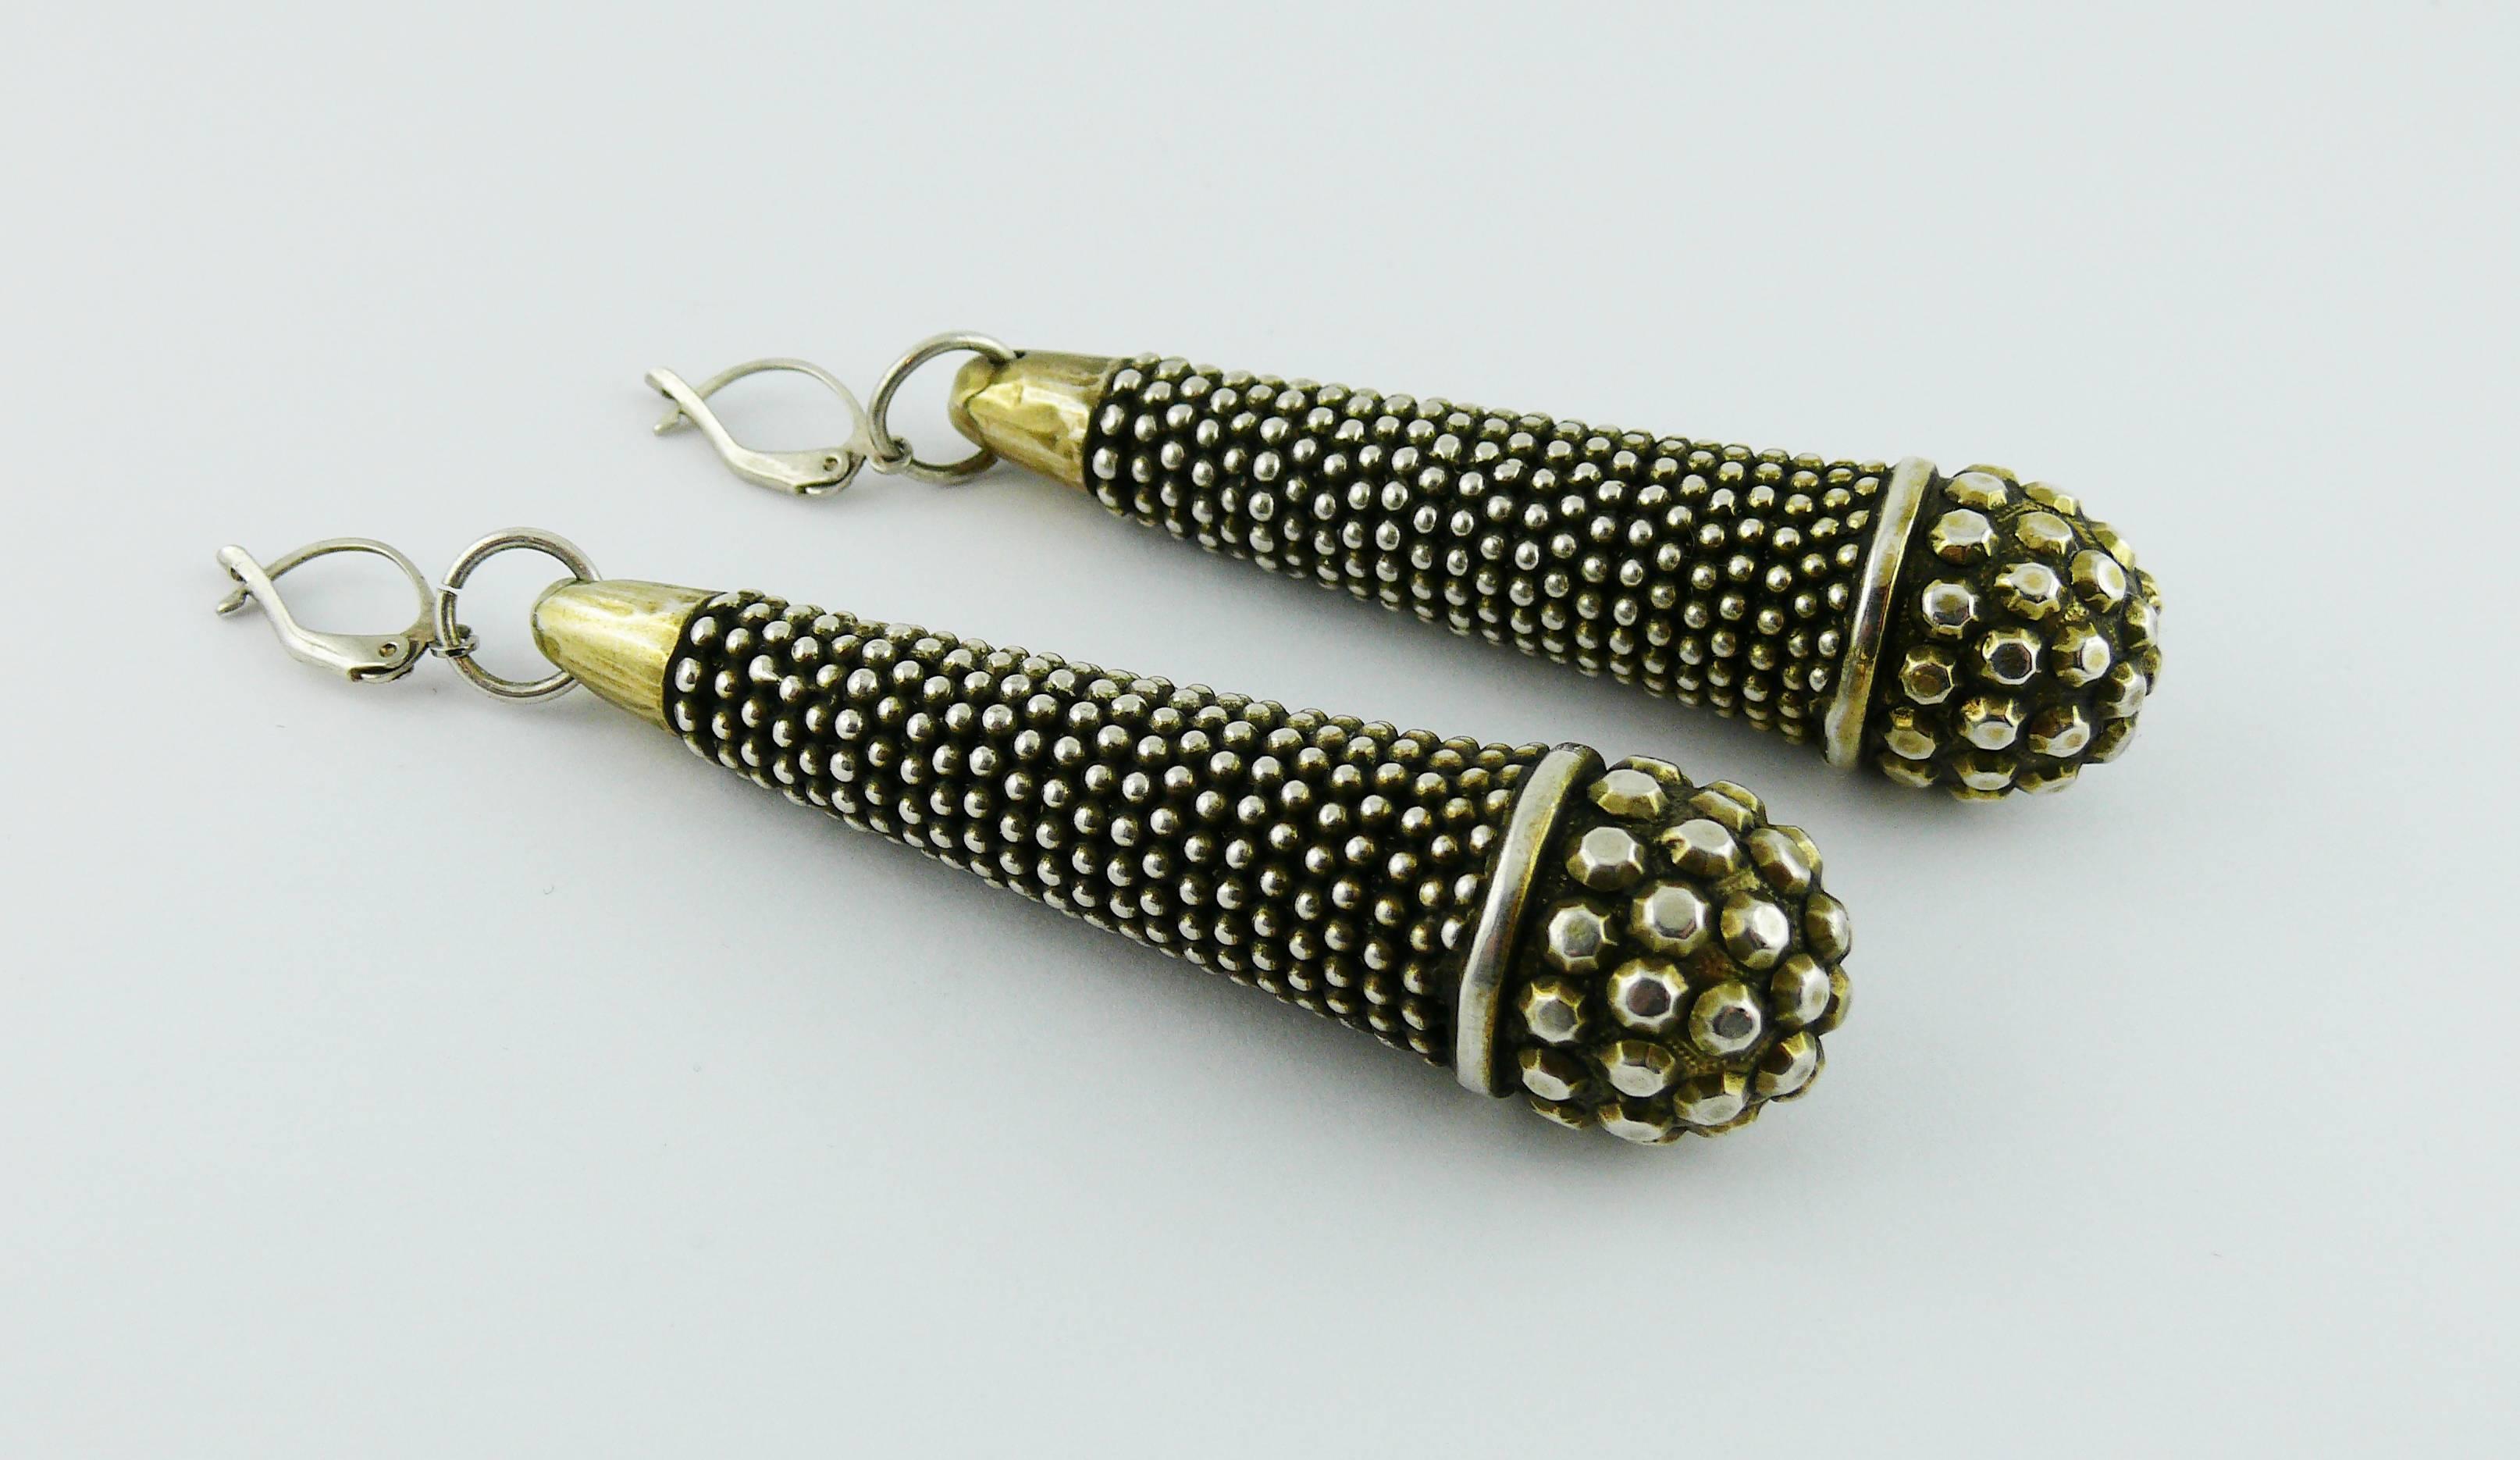 JEAN PAUL GAULTIER vintage massive ethnic inspired silver toned with patina pierced earrings featuring a tubular form with bead pattern design.

Embossed JPG.

Indicative measurements : length approx. 7.5 cm (2.95 inches) / max. width approx. 1.5 cm